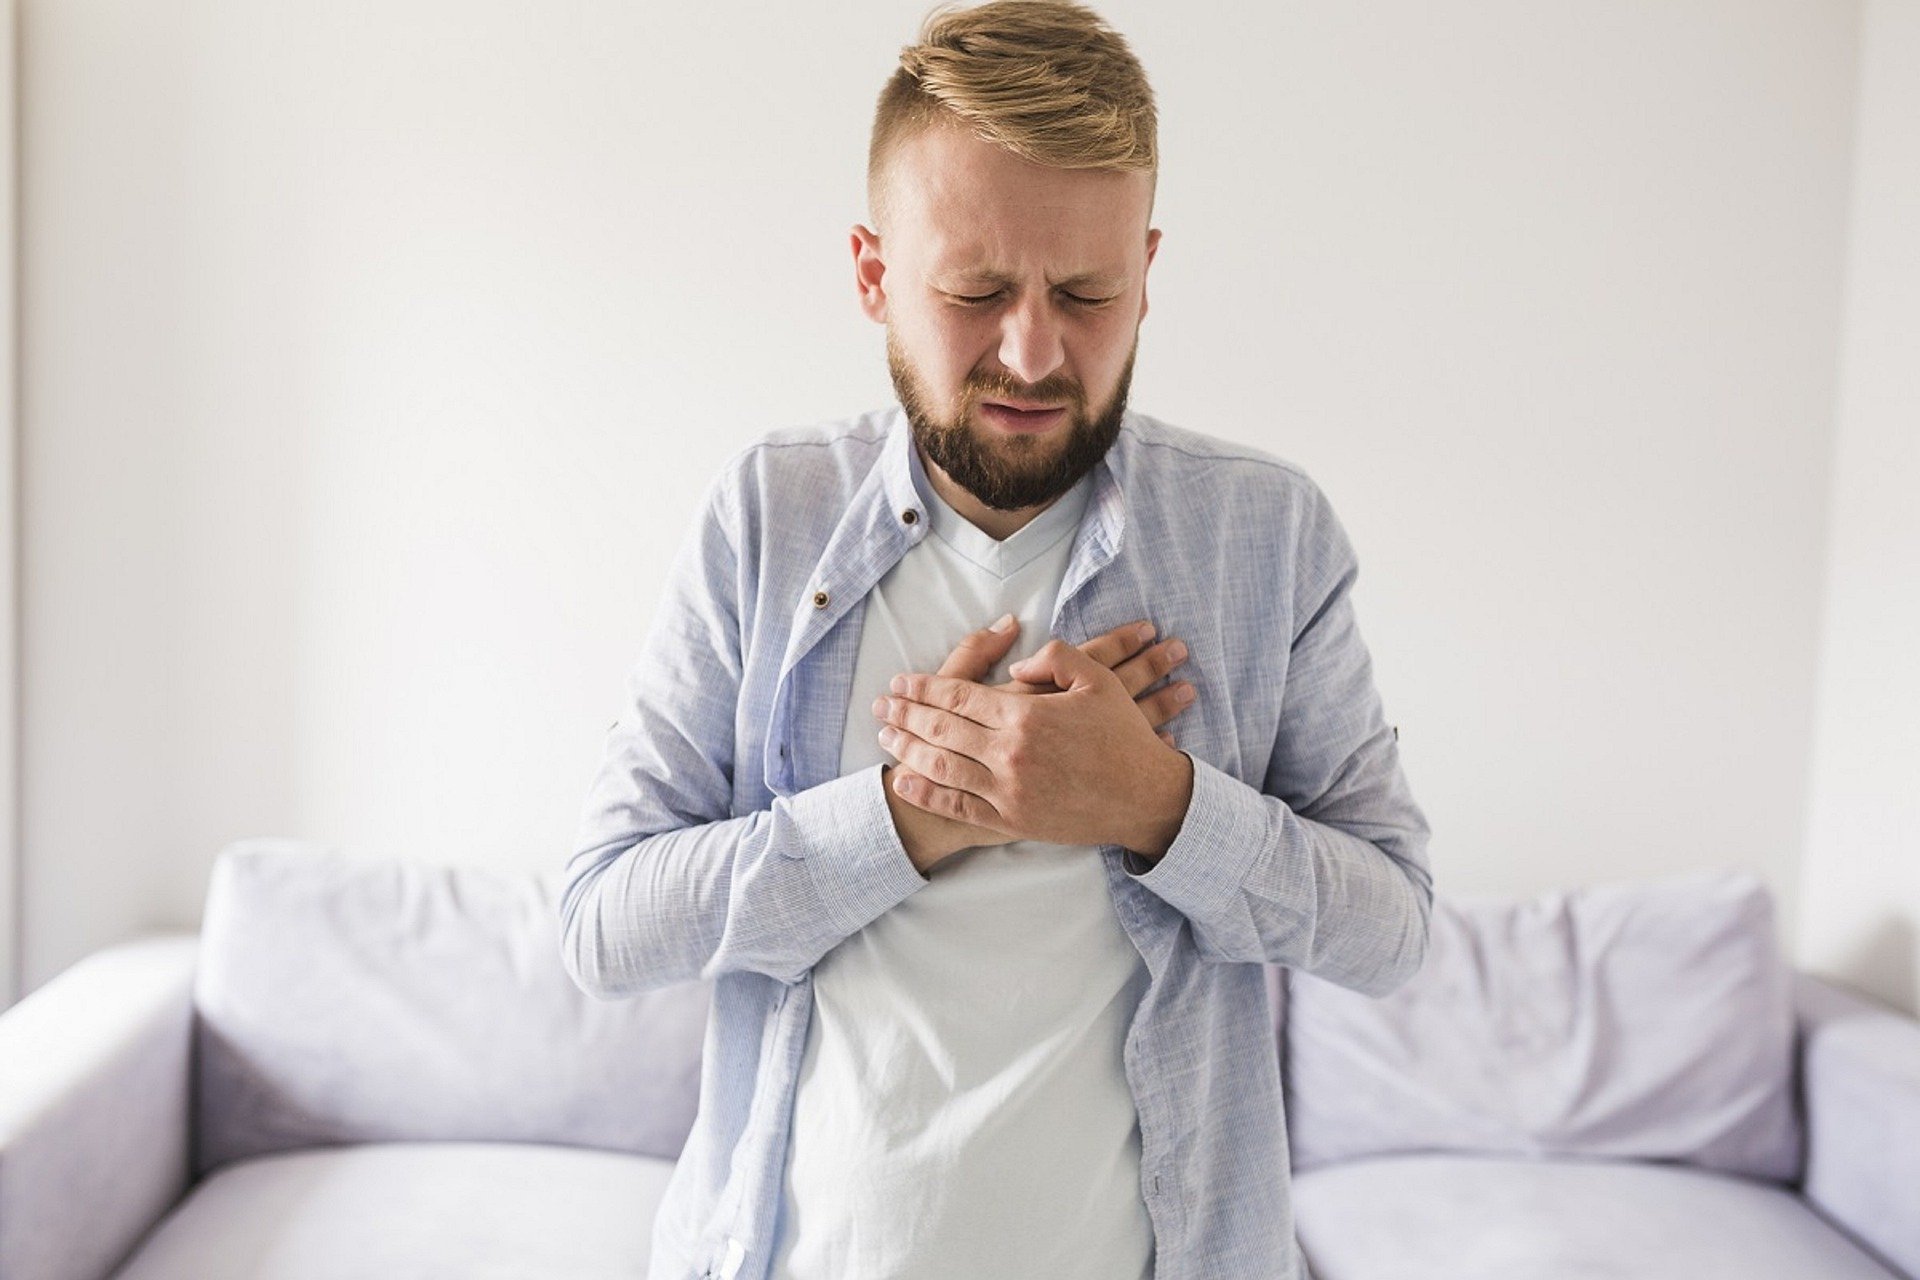 Foods to Avoid With Heartburn: How to Prevent Heartburn